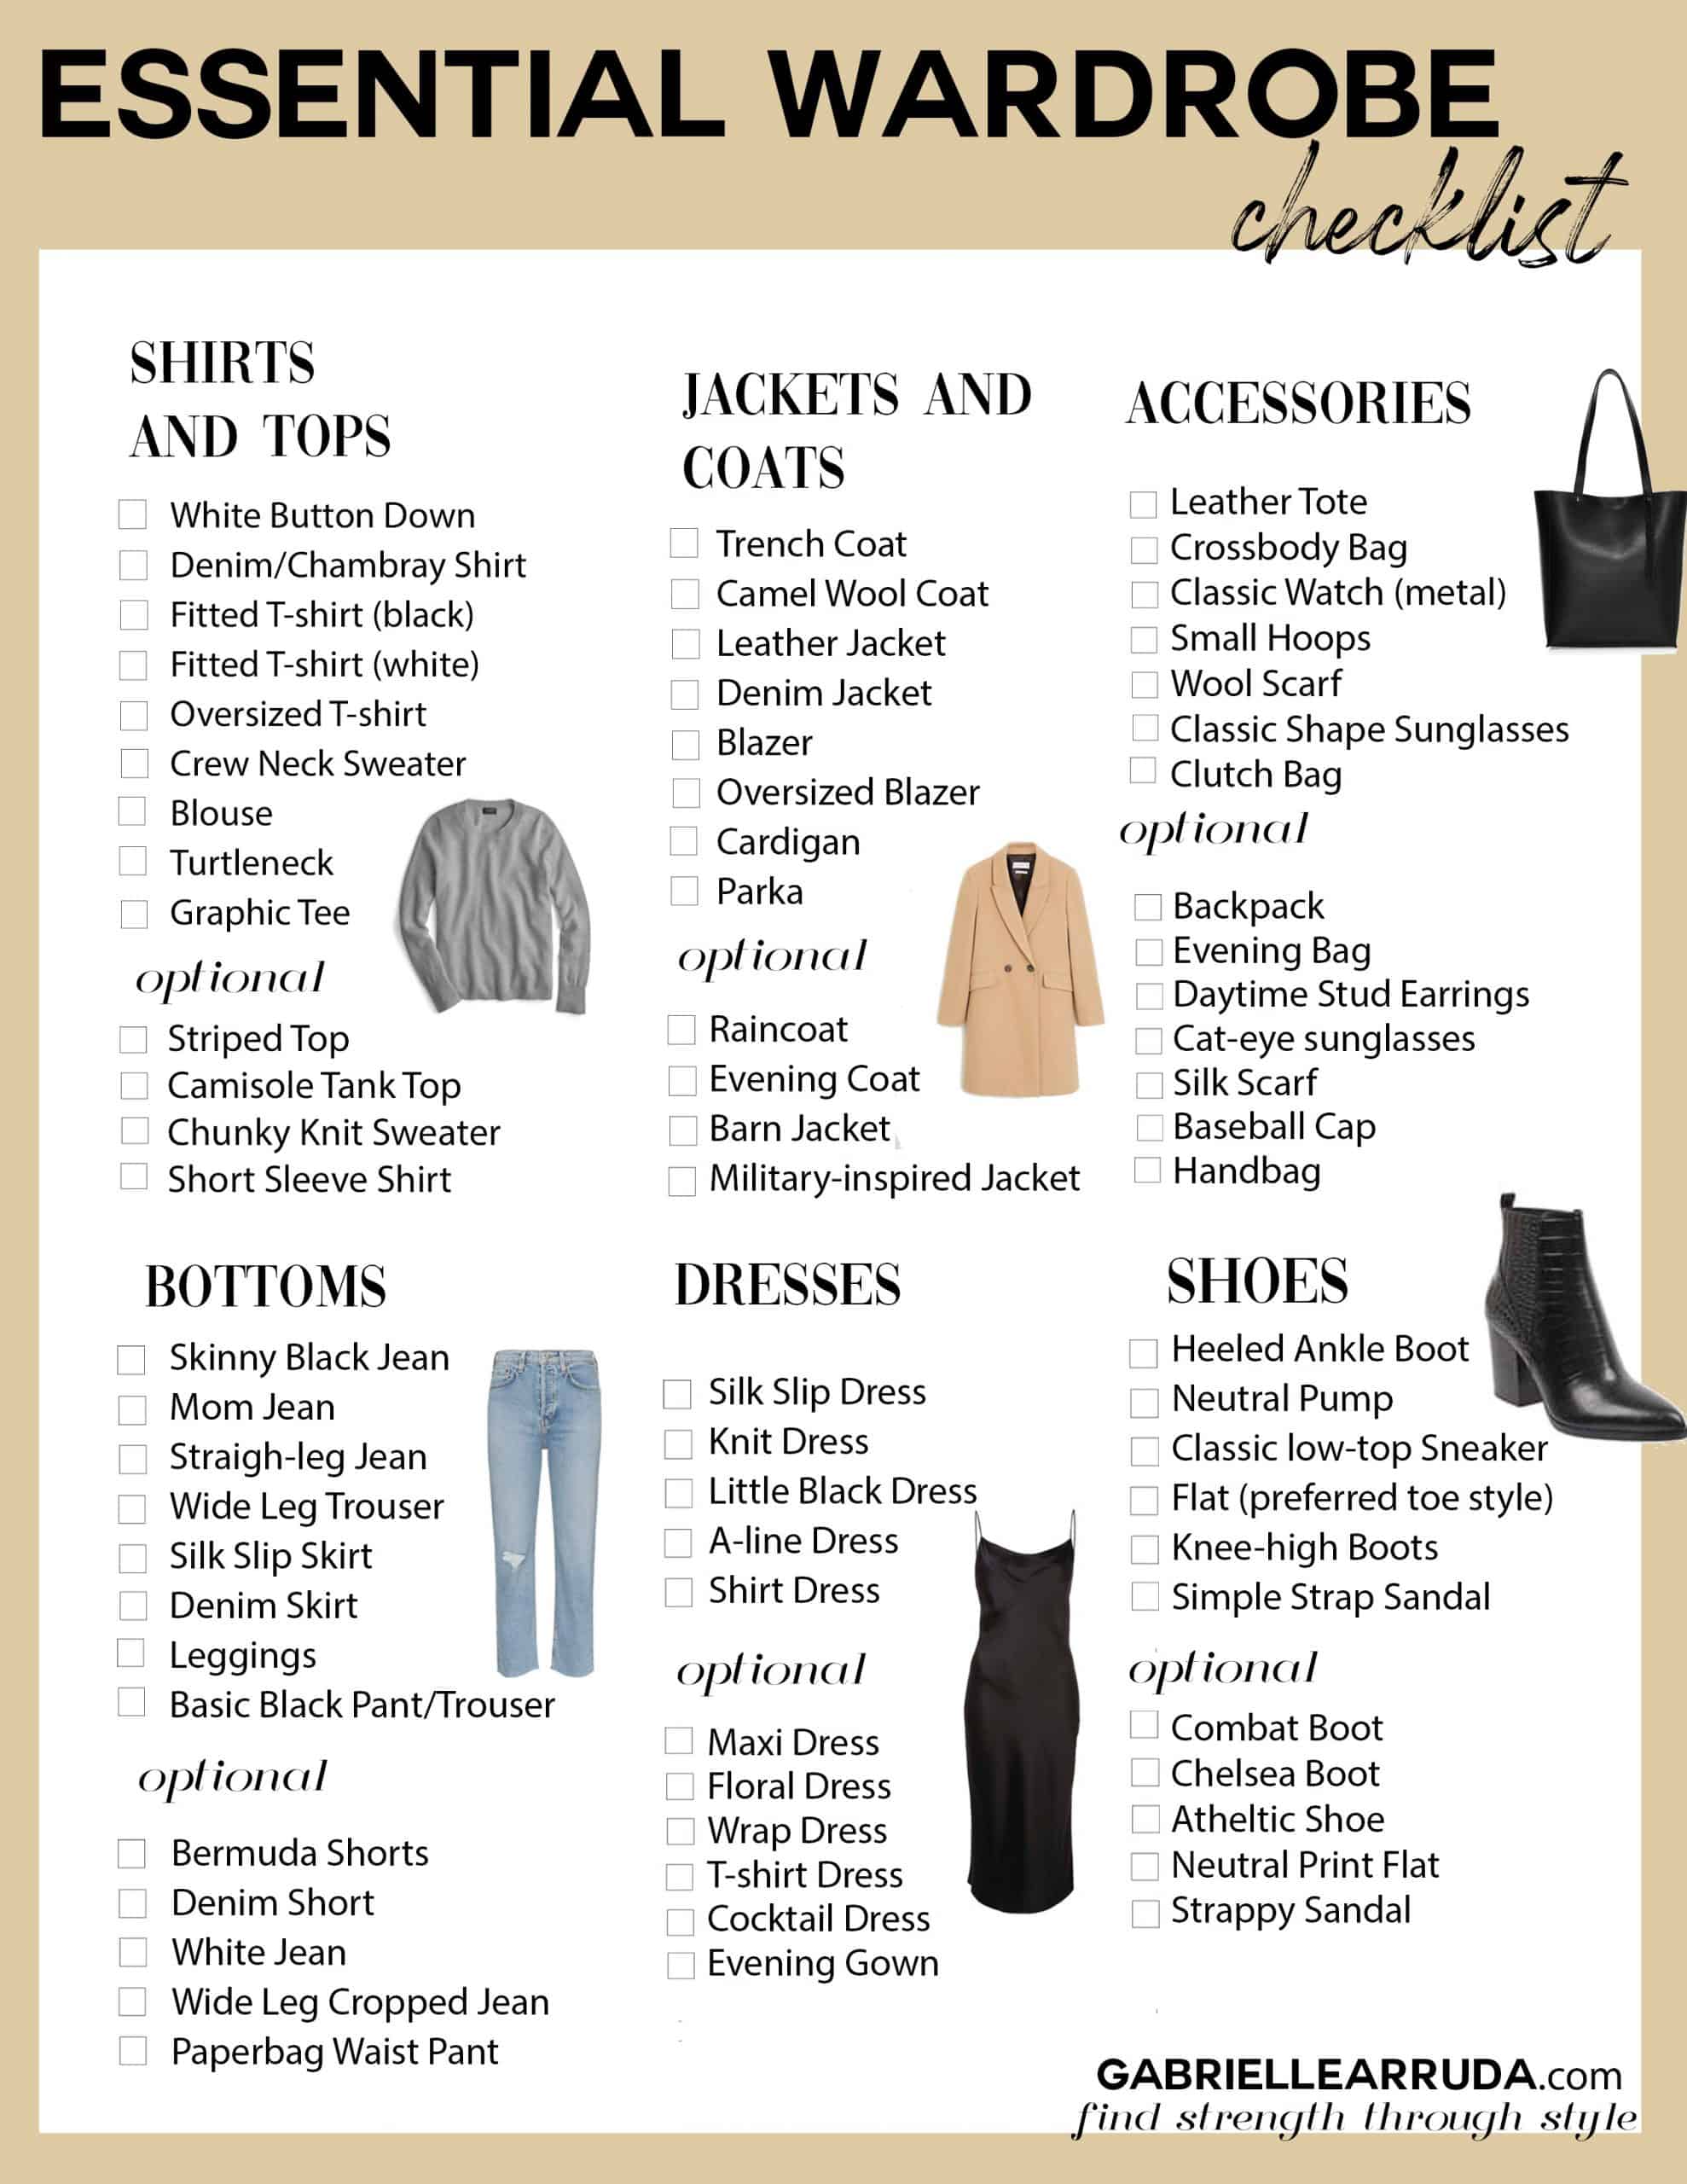 how to build a wardrobe from scratch, the essential wardrobe checklist